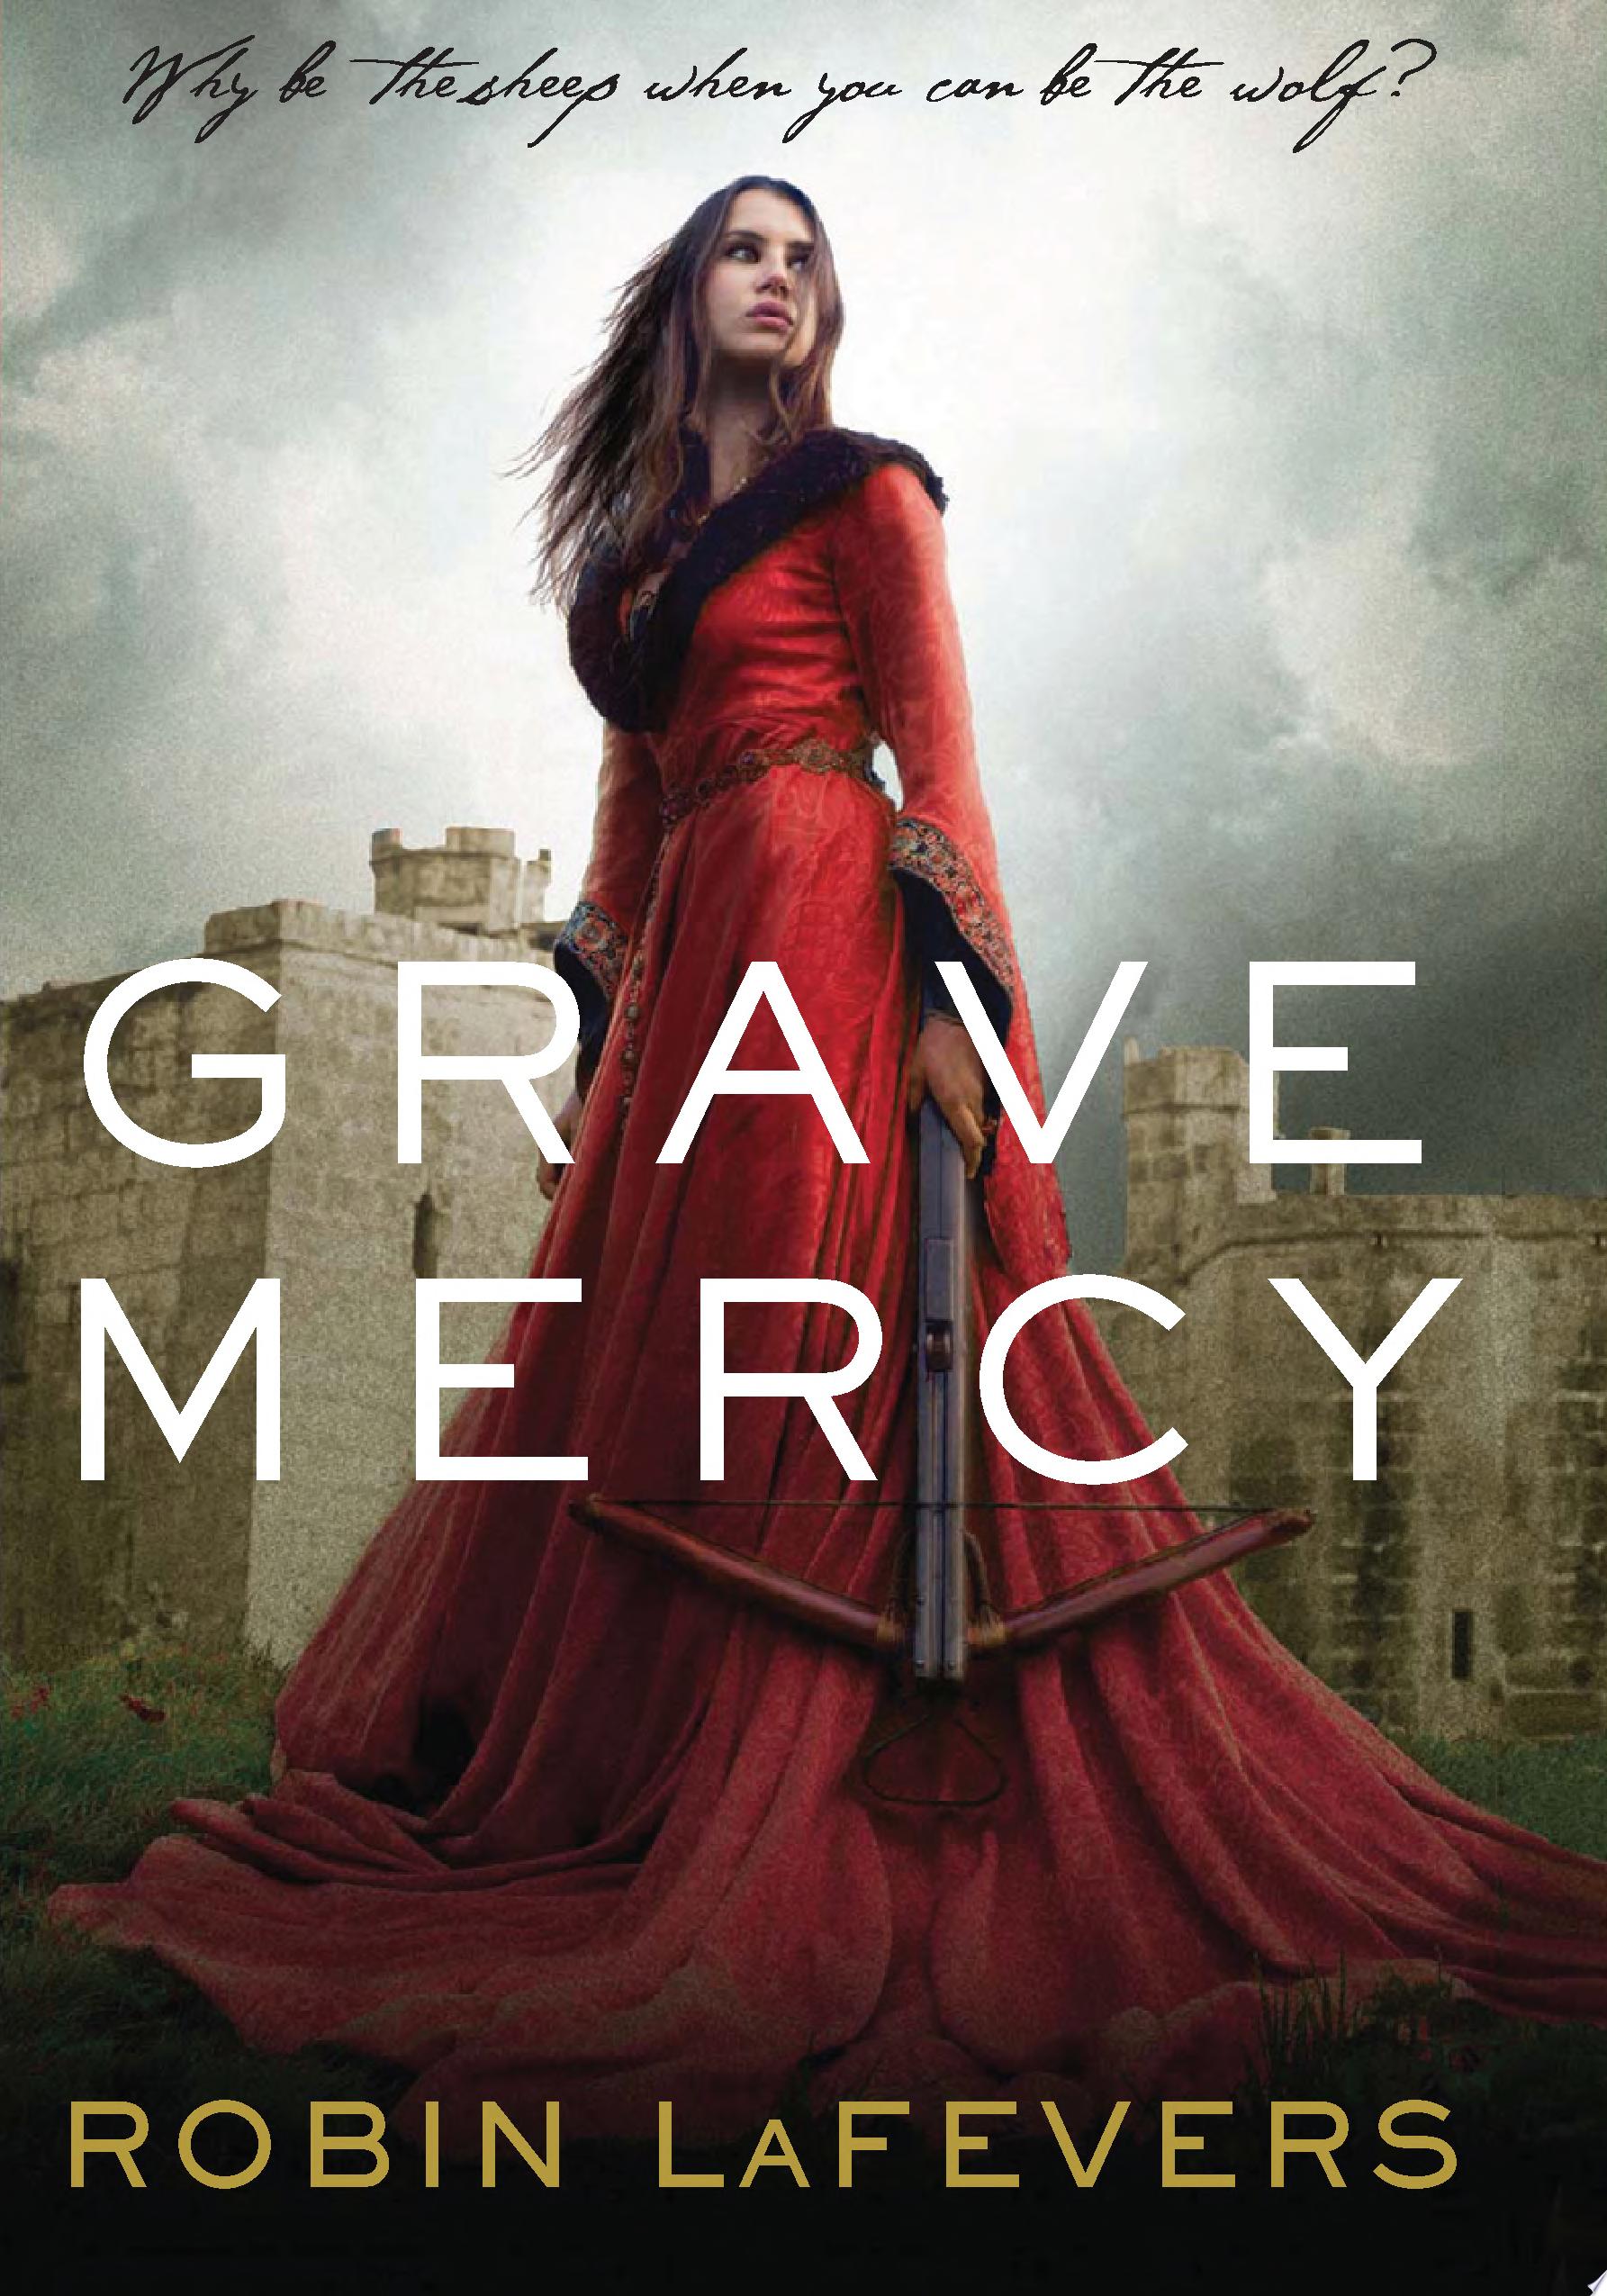 Image for "Grave Mercy"